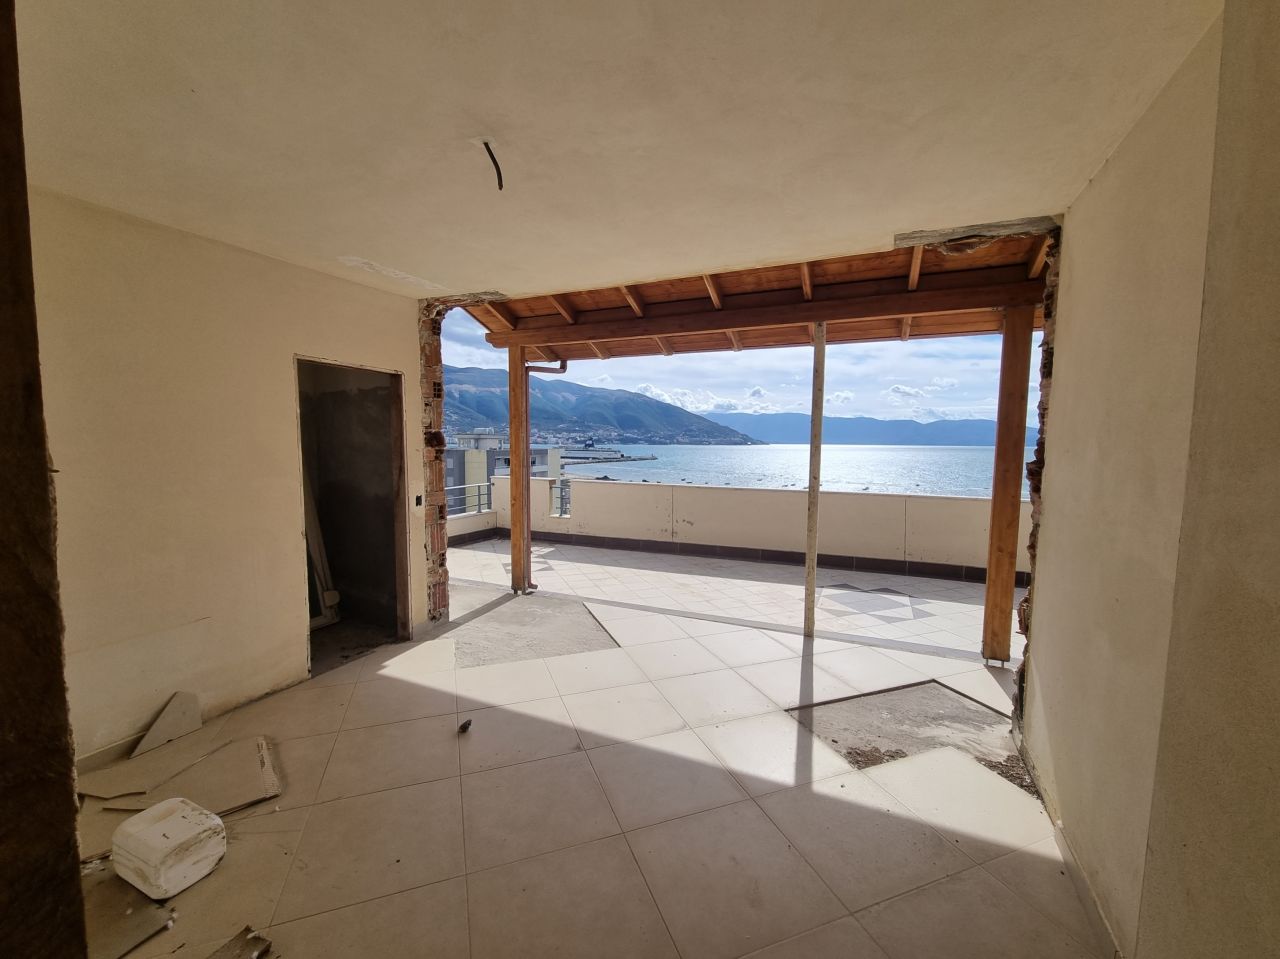 Penthouse With A Sea View For Sale In Vlore, Albania